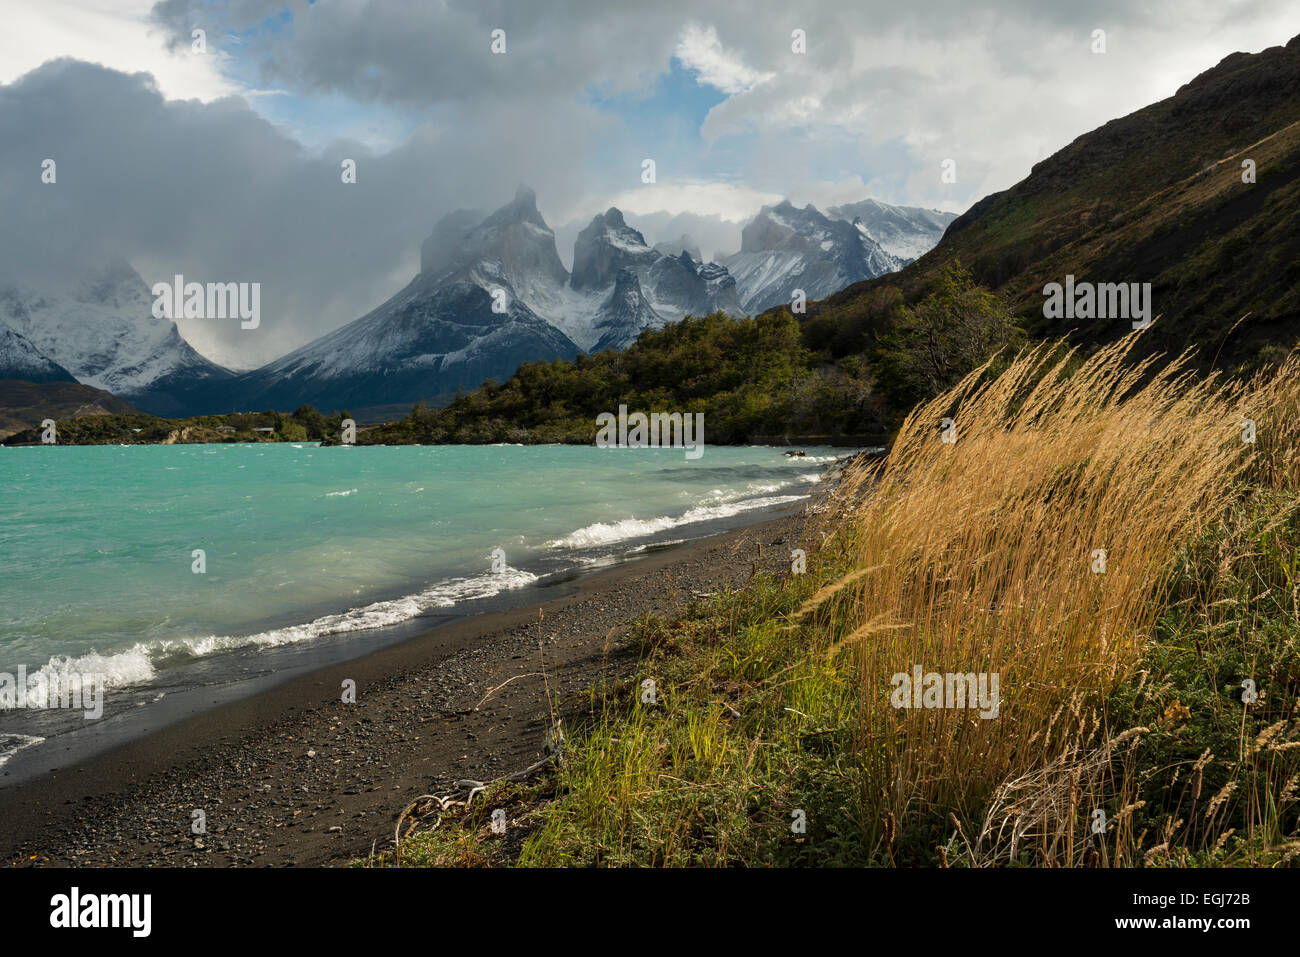 Lake Pehoé, Torres del Paine National Park, Patagonia, Chile Stock Photo